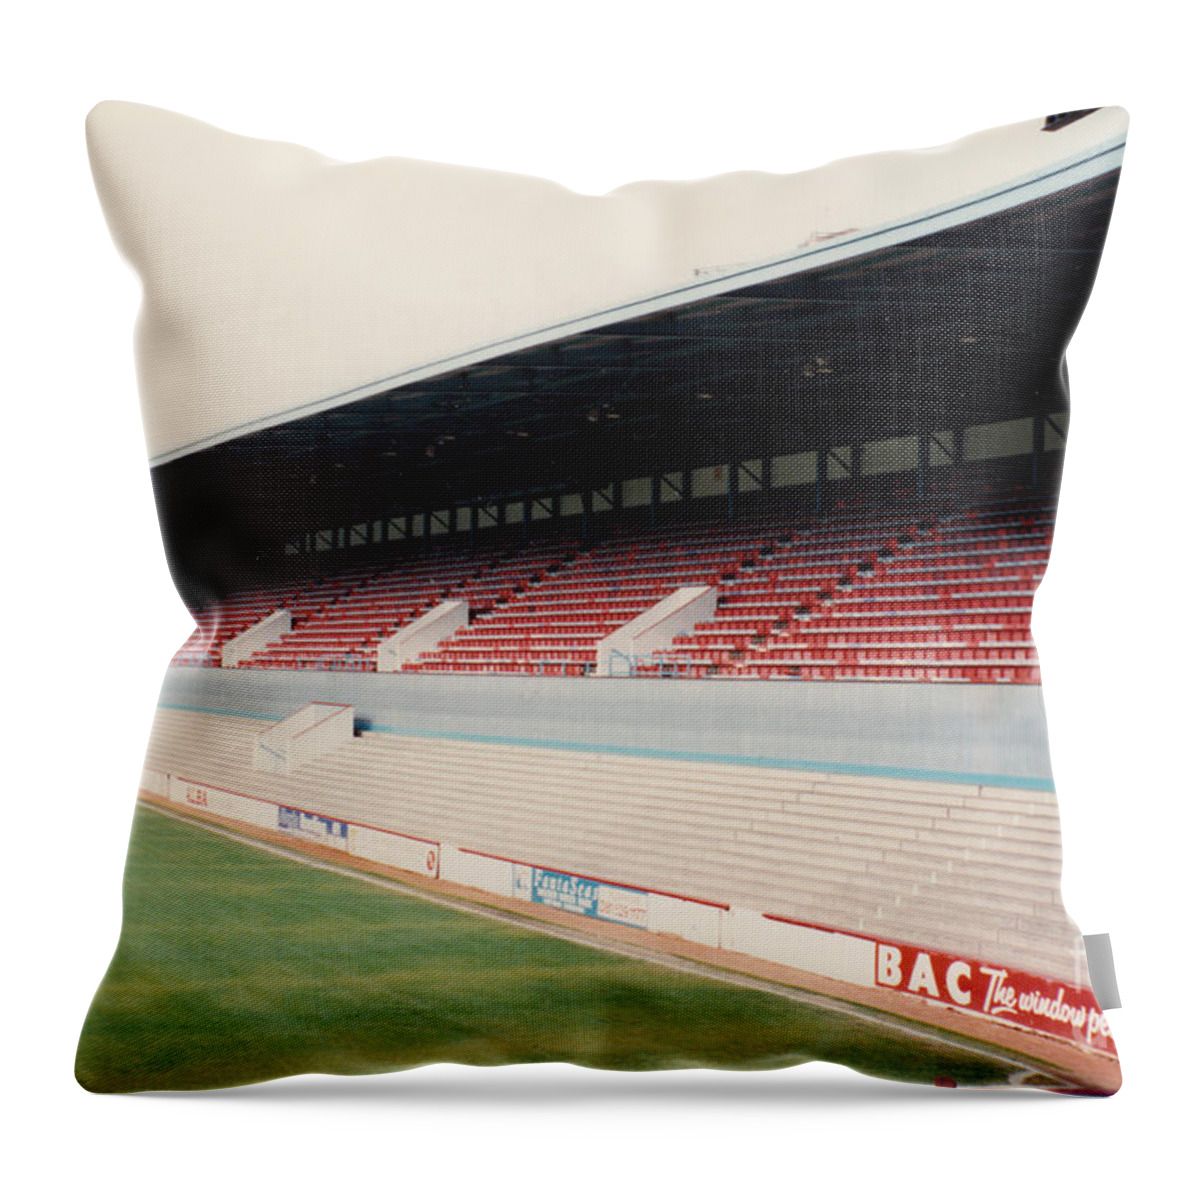 West Ham Throw Pillow featuring the photograph West Ham - Upton Park - East Stand 3 - April 1991 by Legendary Football Grounds